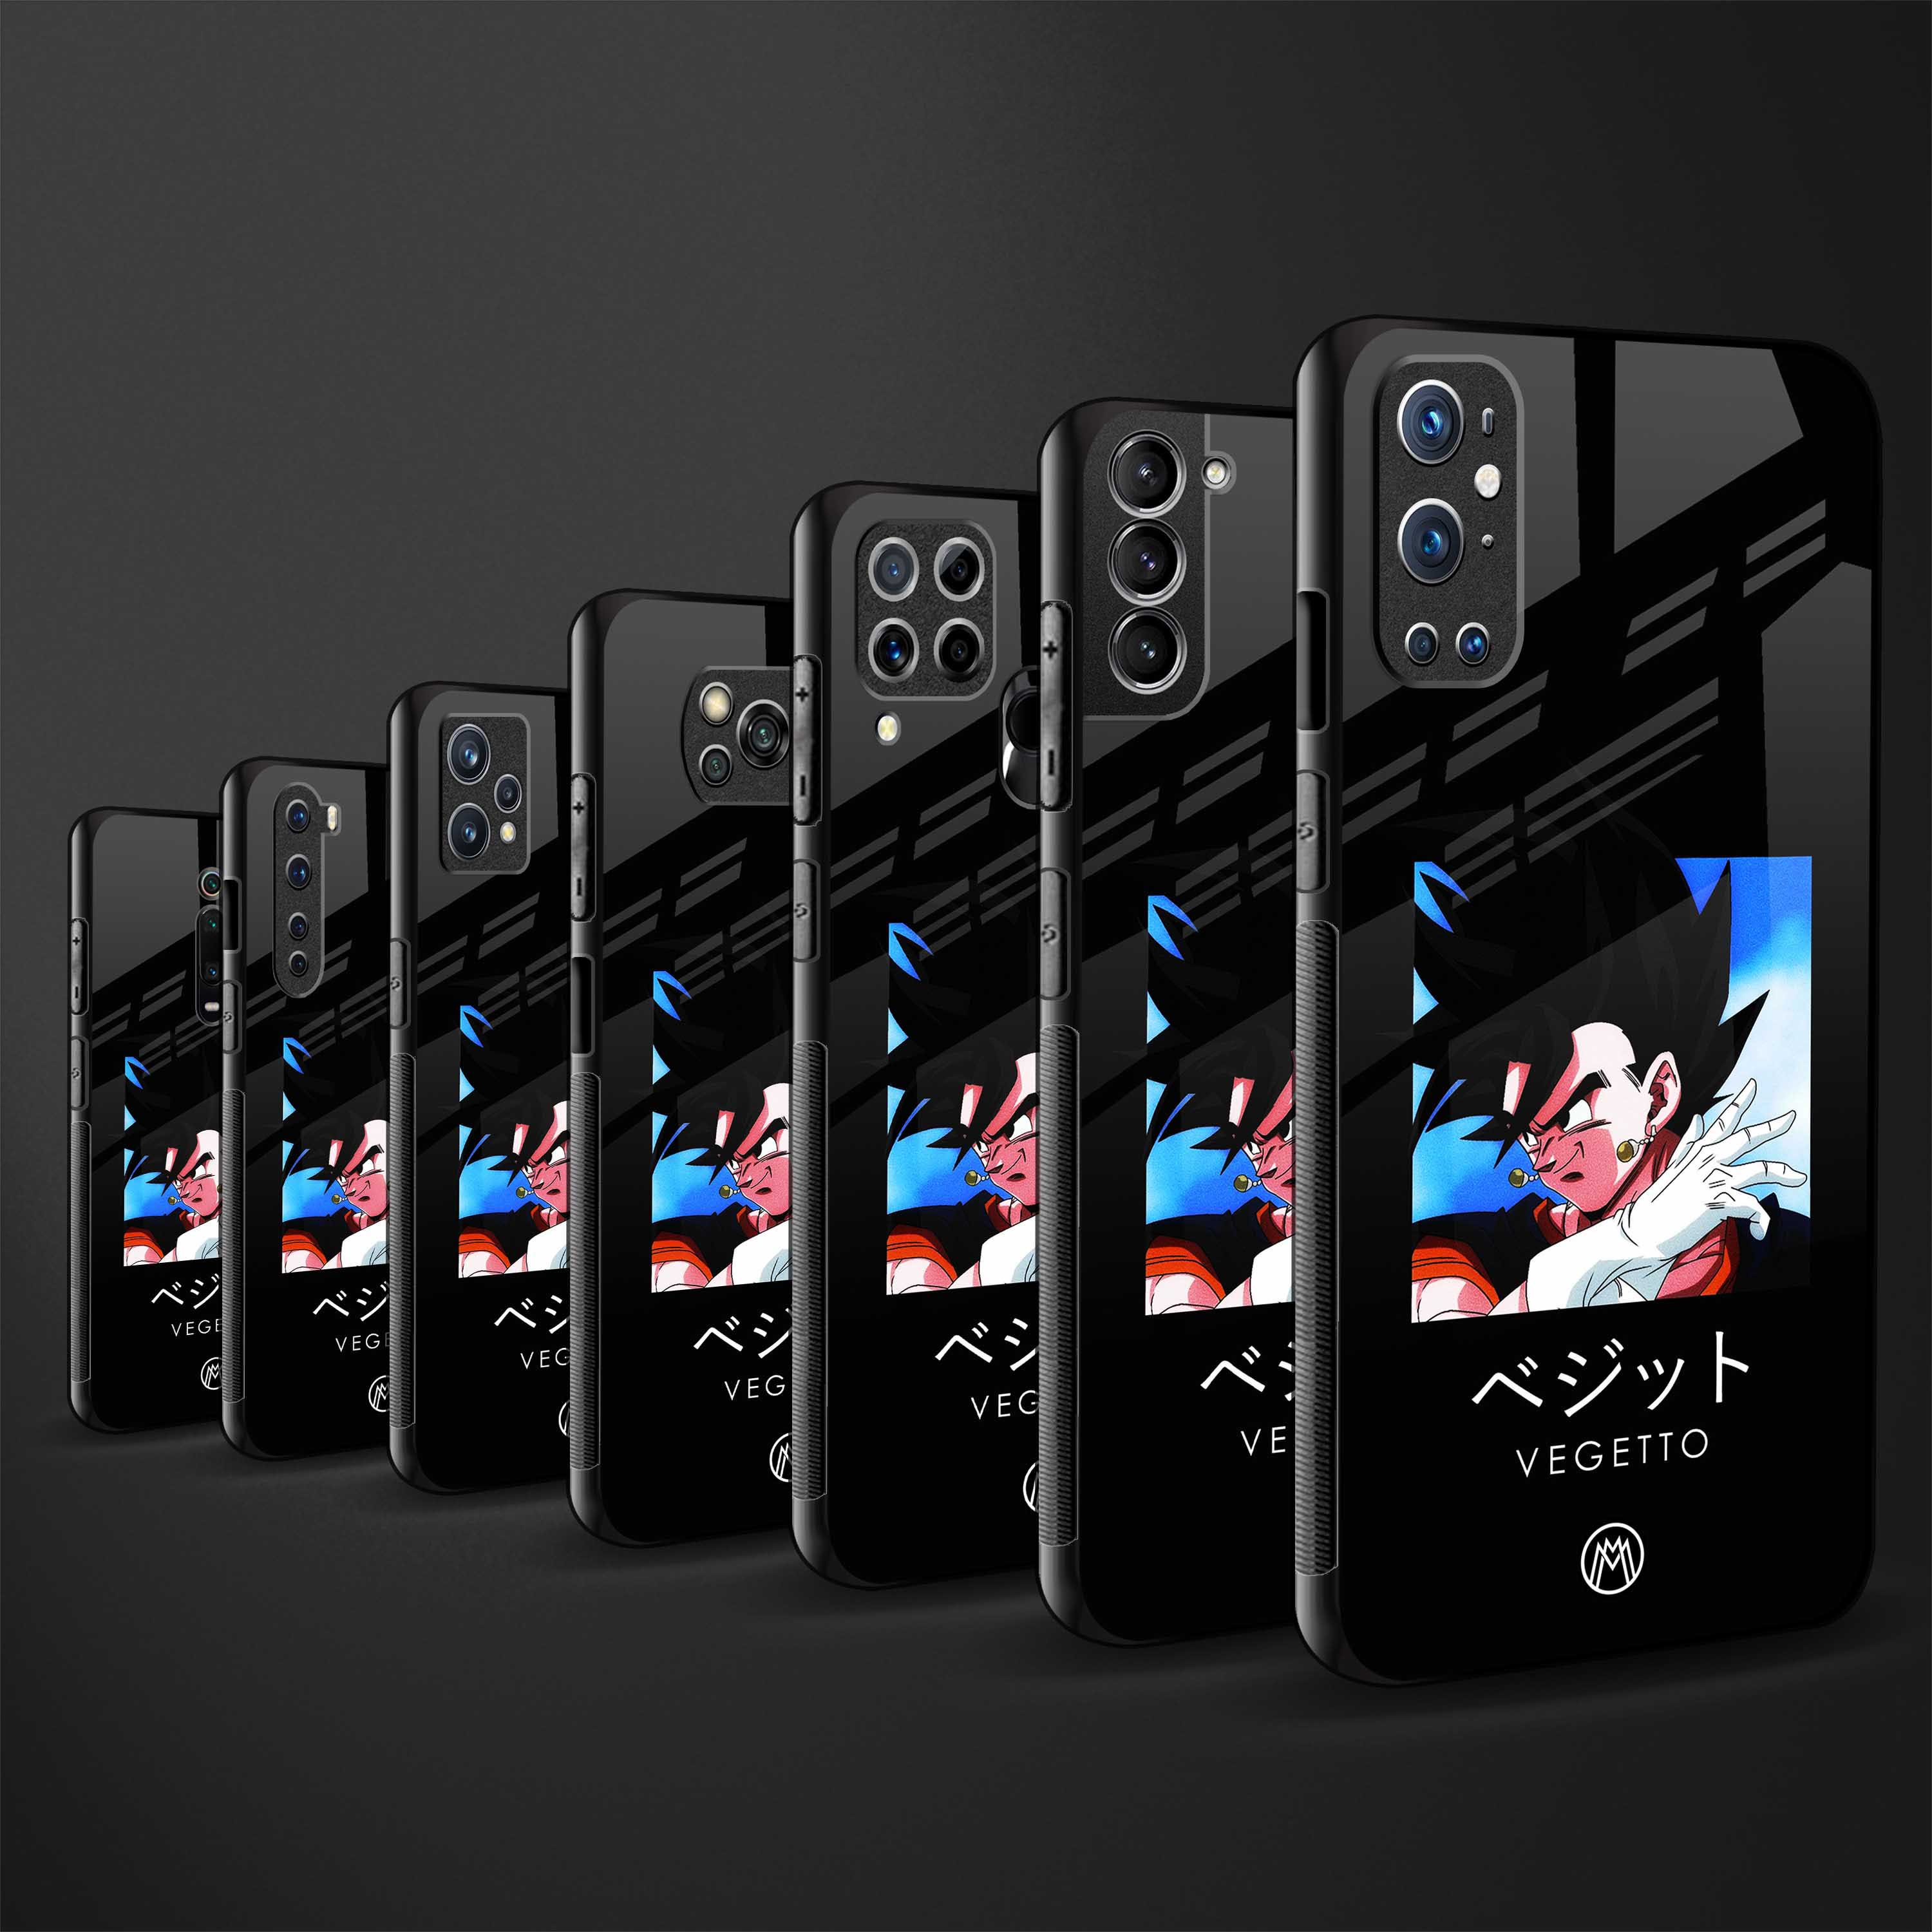 Anime Phone Cases for Samsung Galaxy for Sale  Redbubble